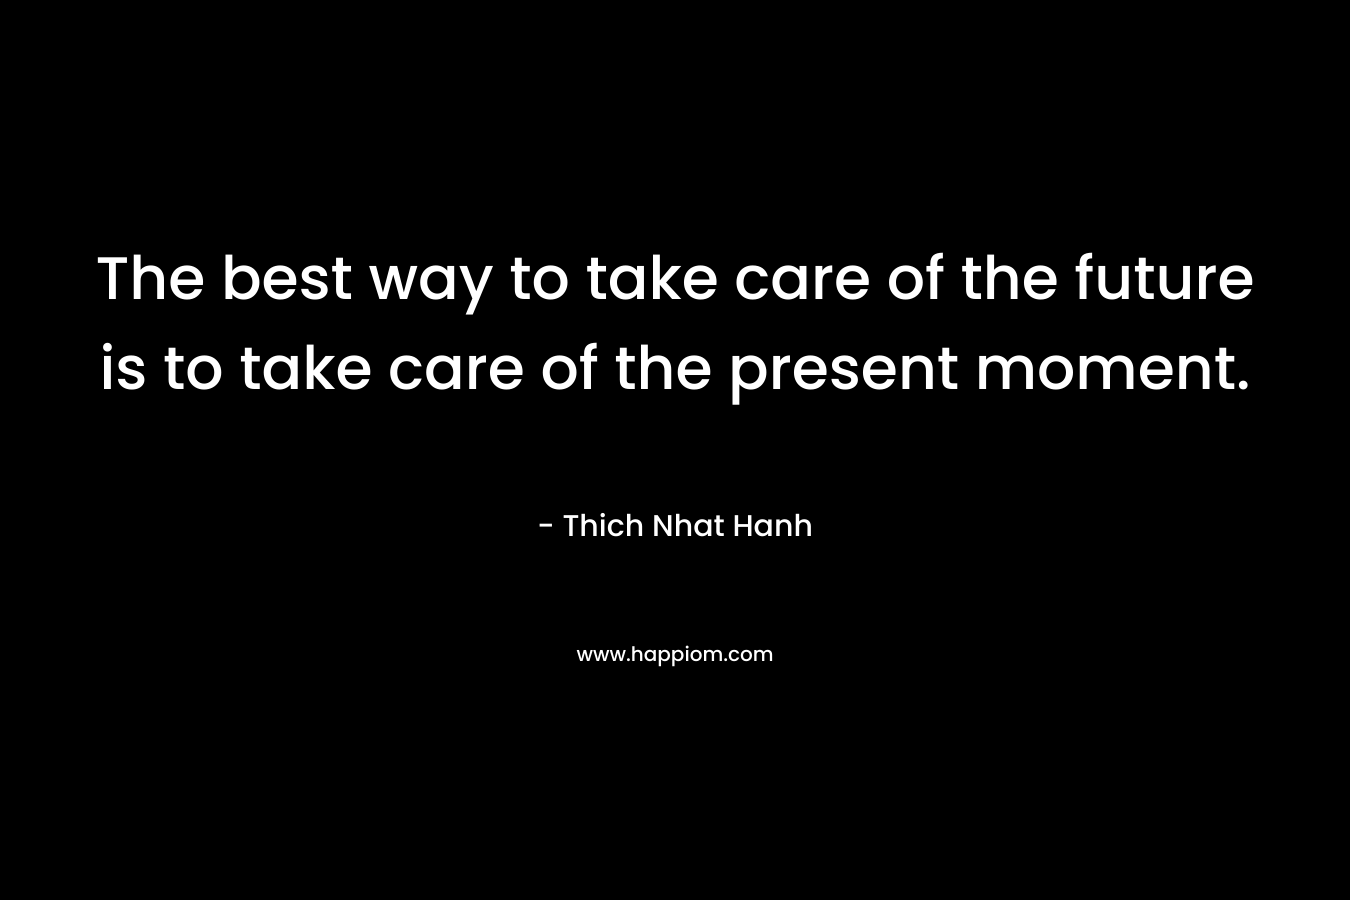 The best way to take care of the future is to take care of the present moment.